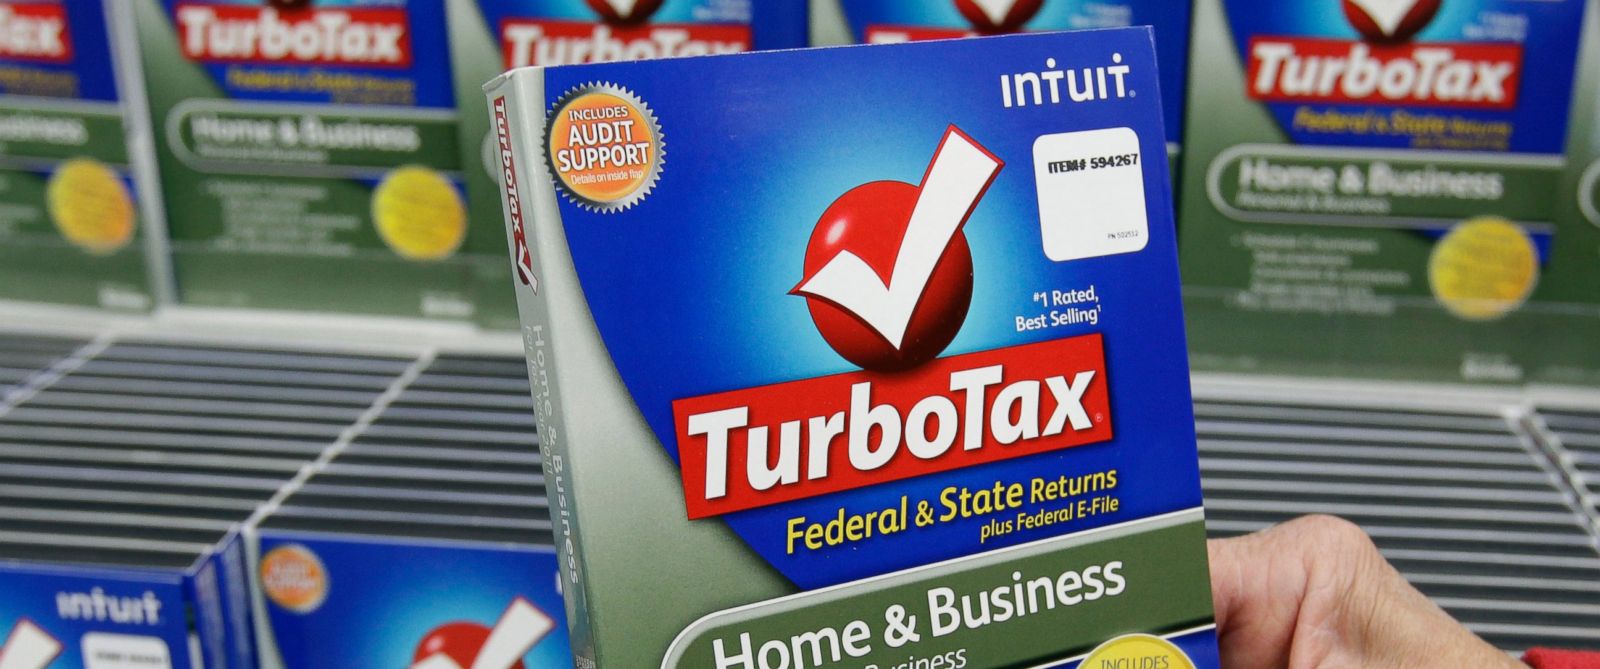 turbotax-changes-the-rules-then-offers-rebates-then-upgrades-abc-news